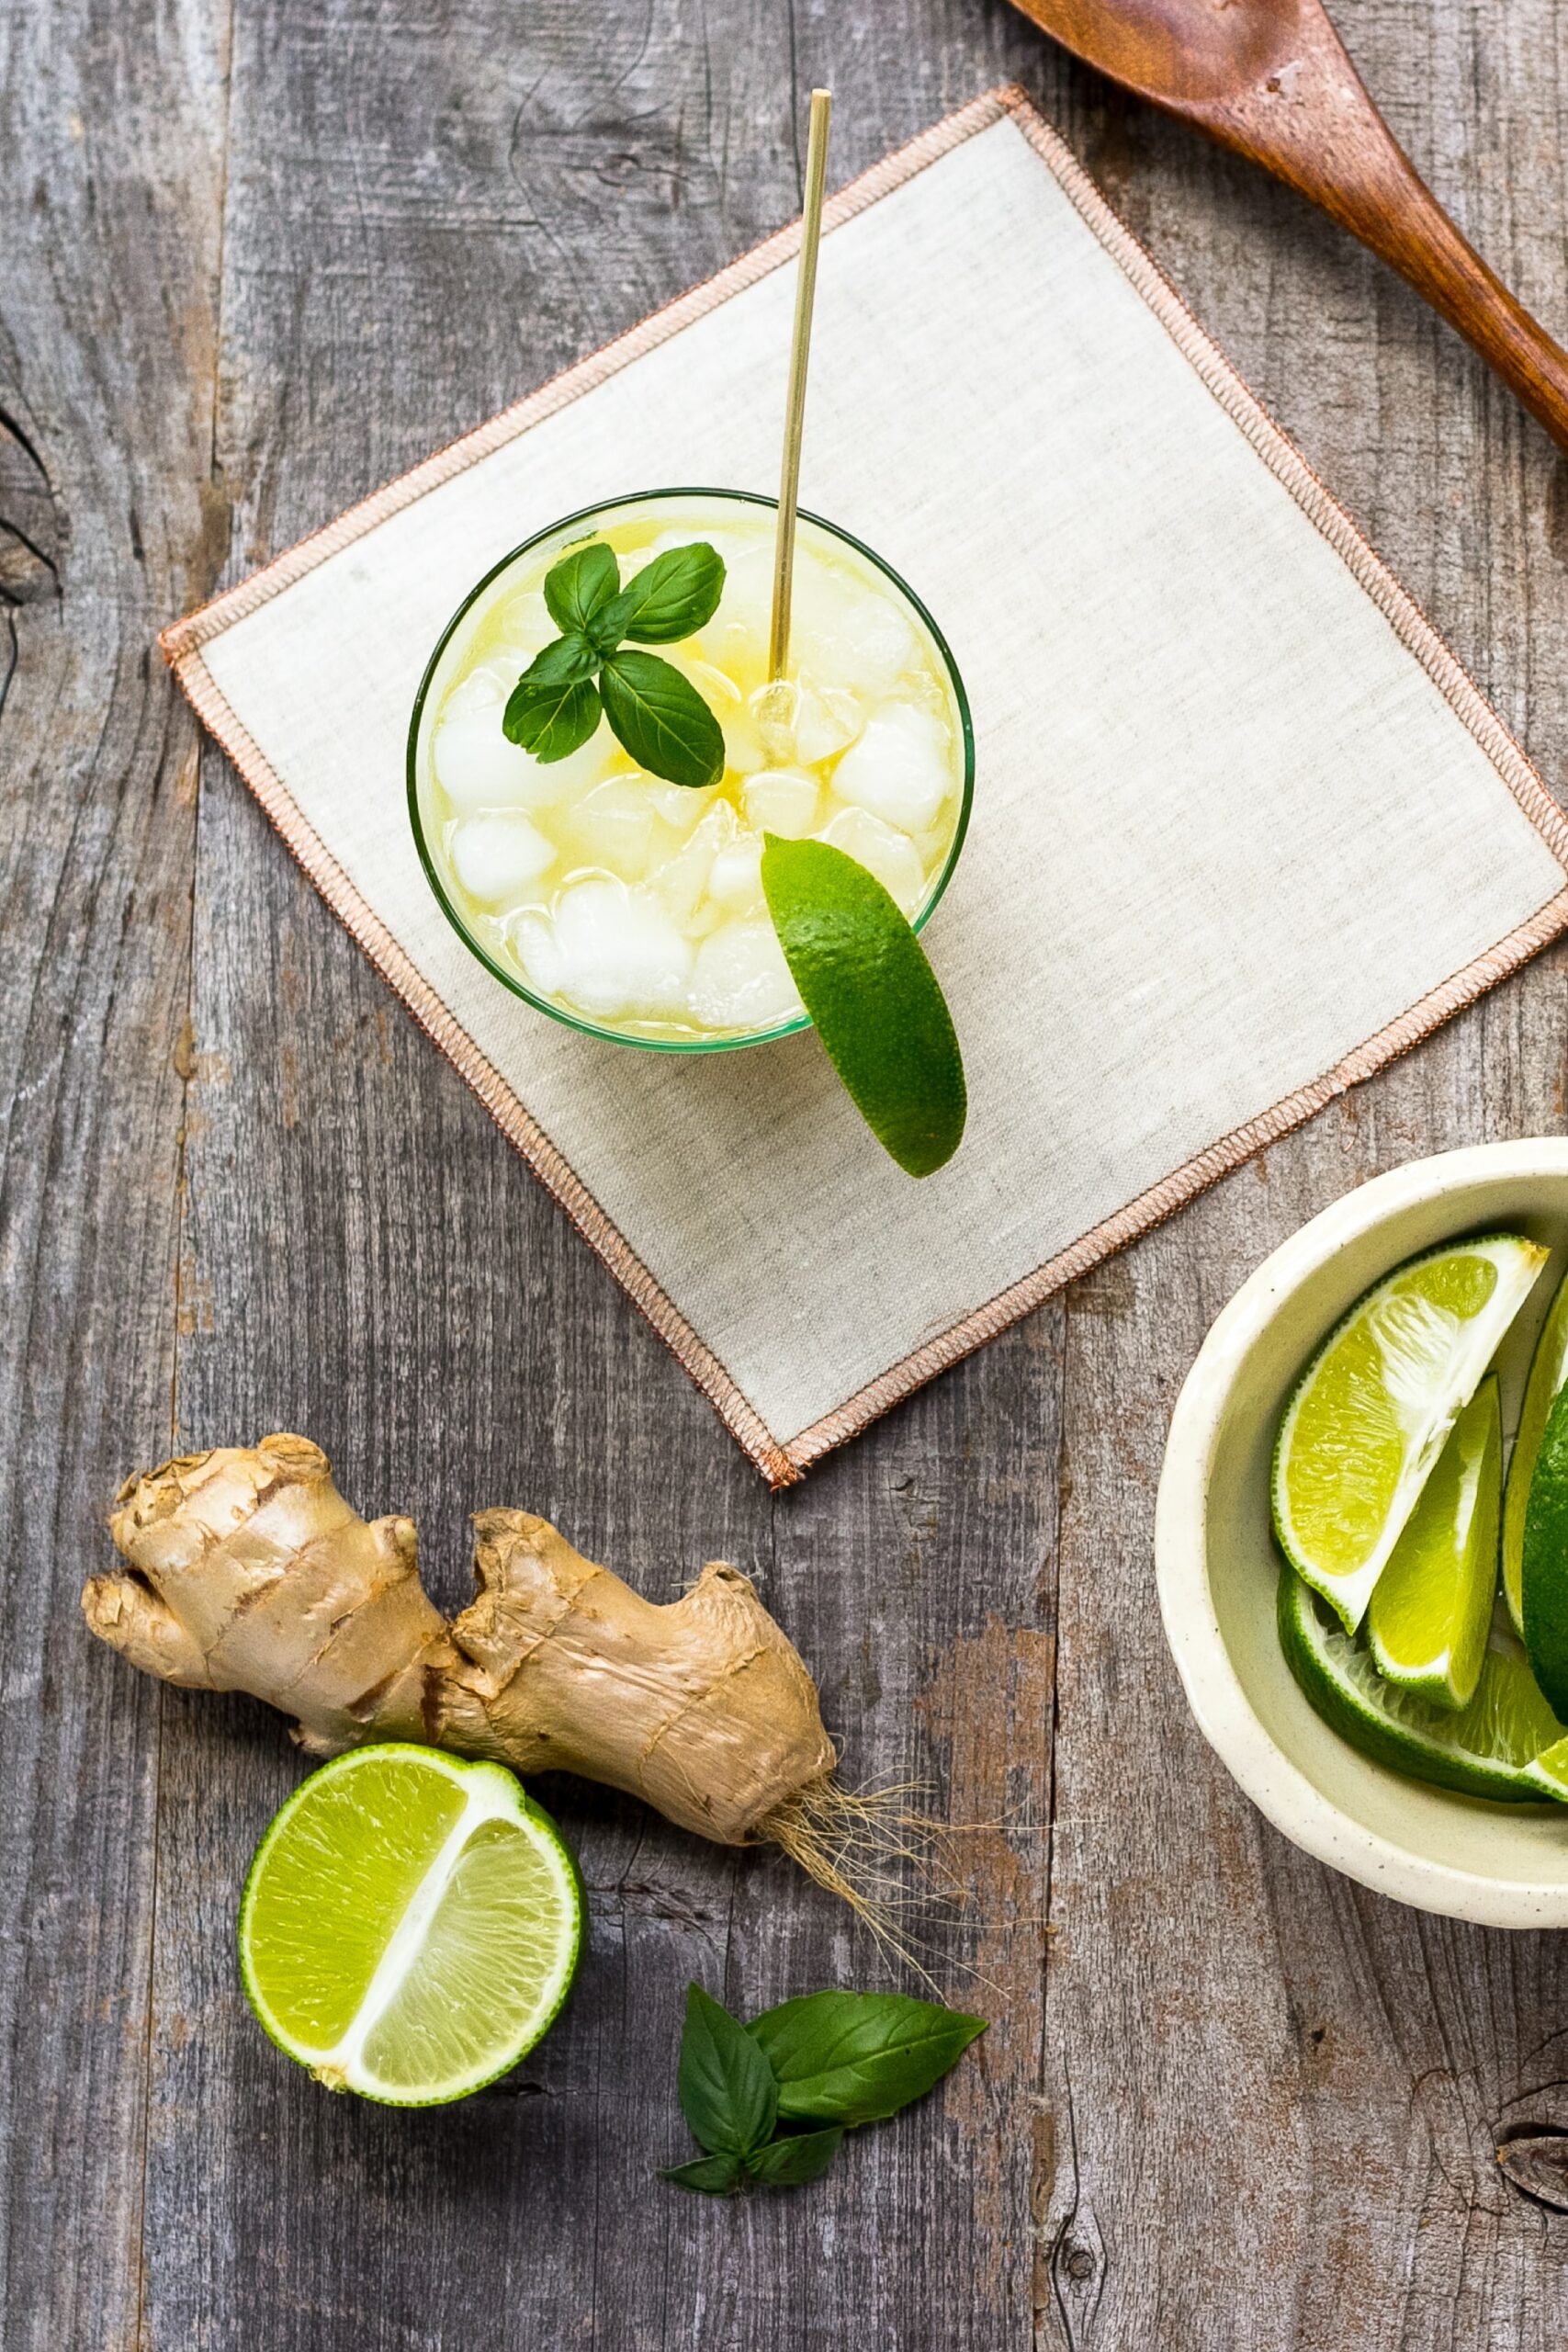 Ginger for healthy heart